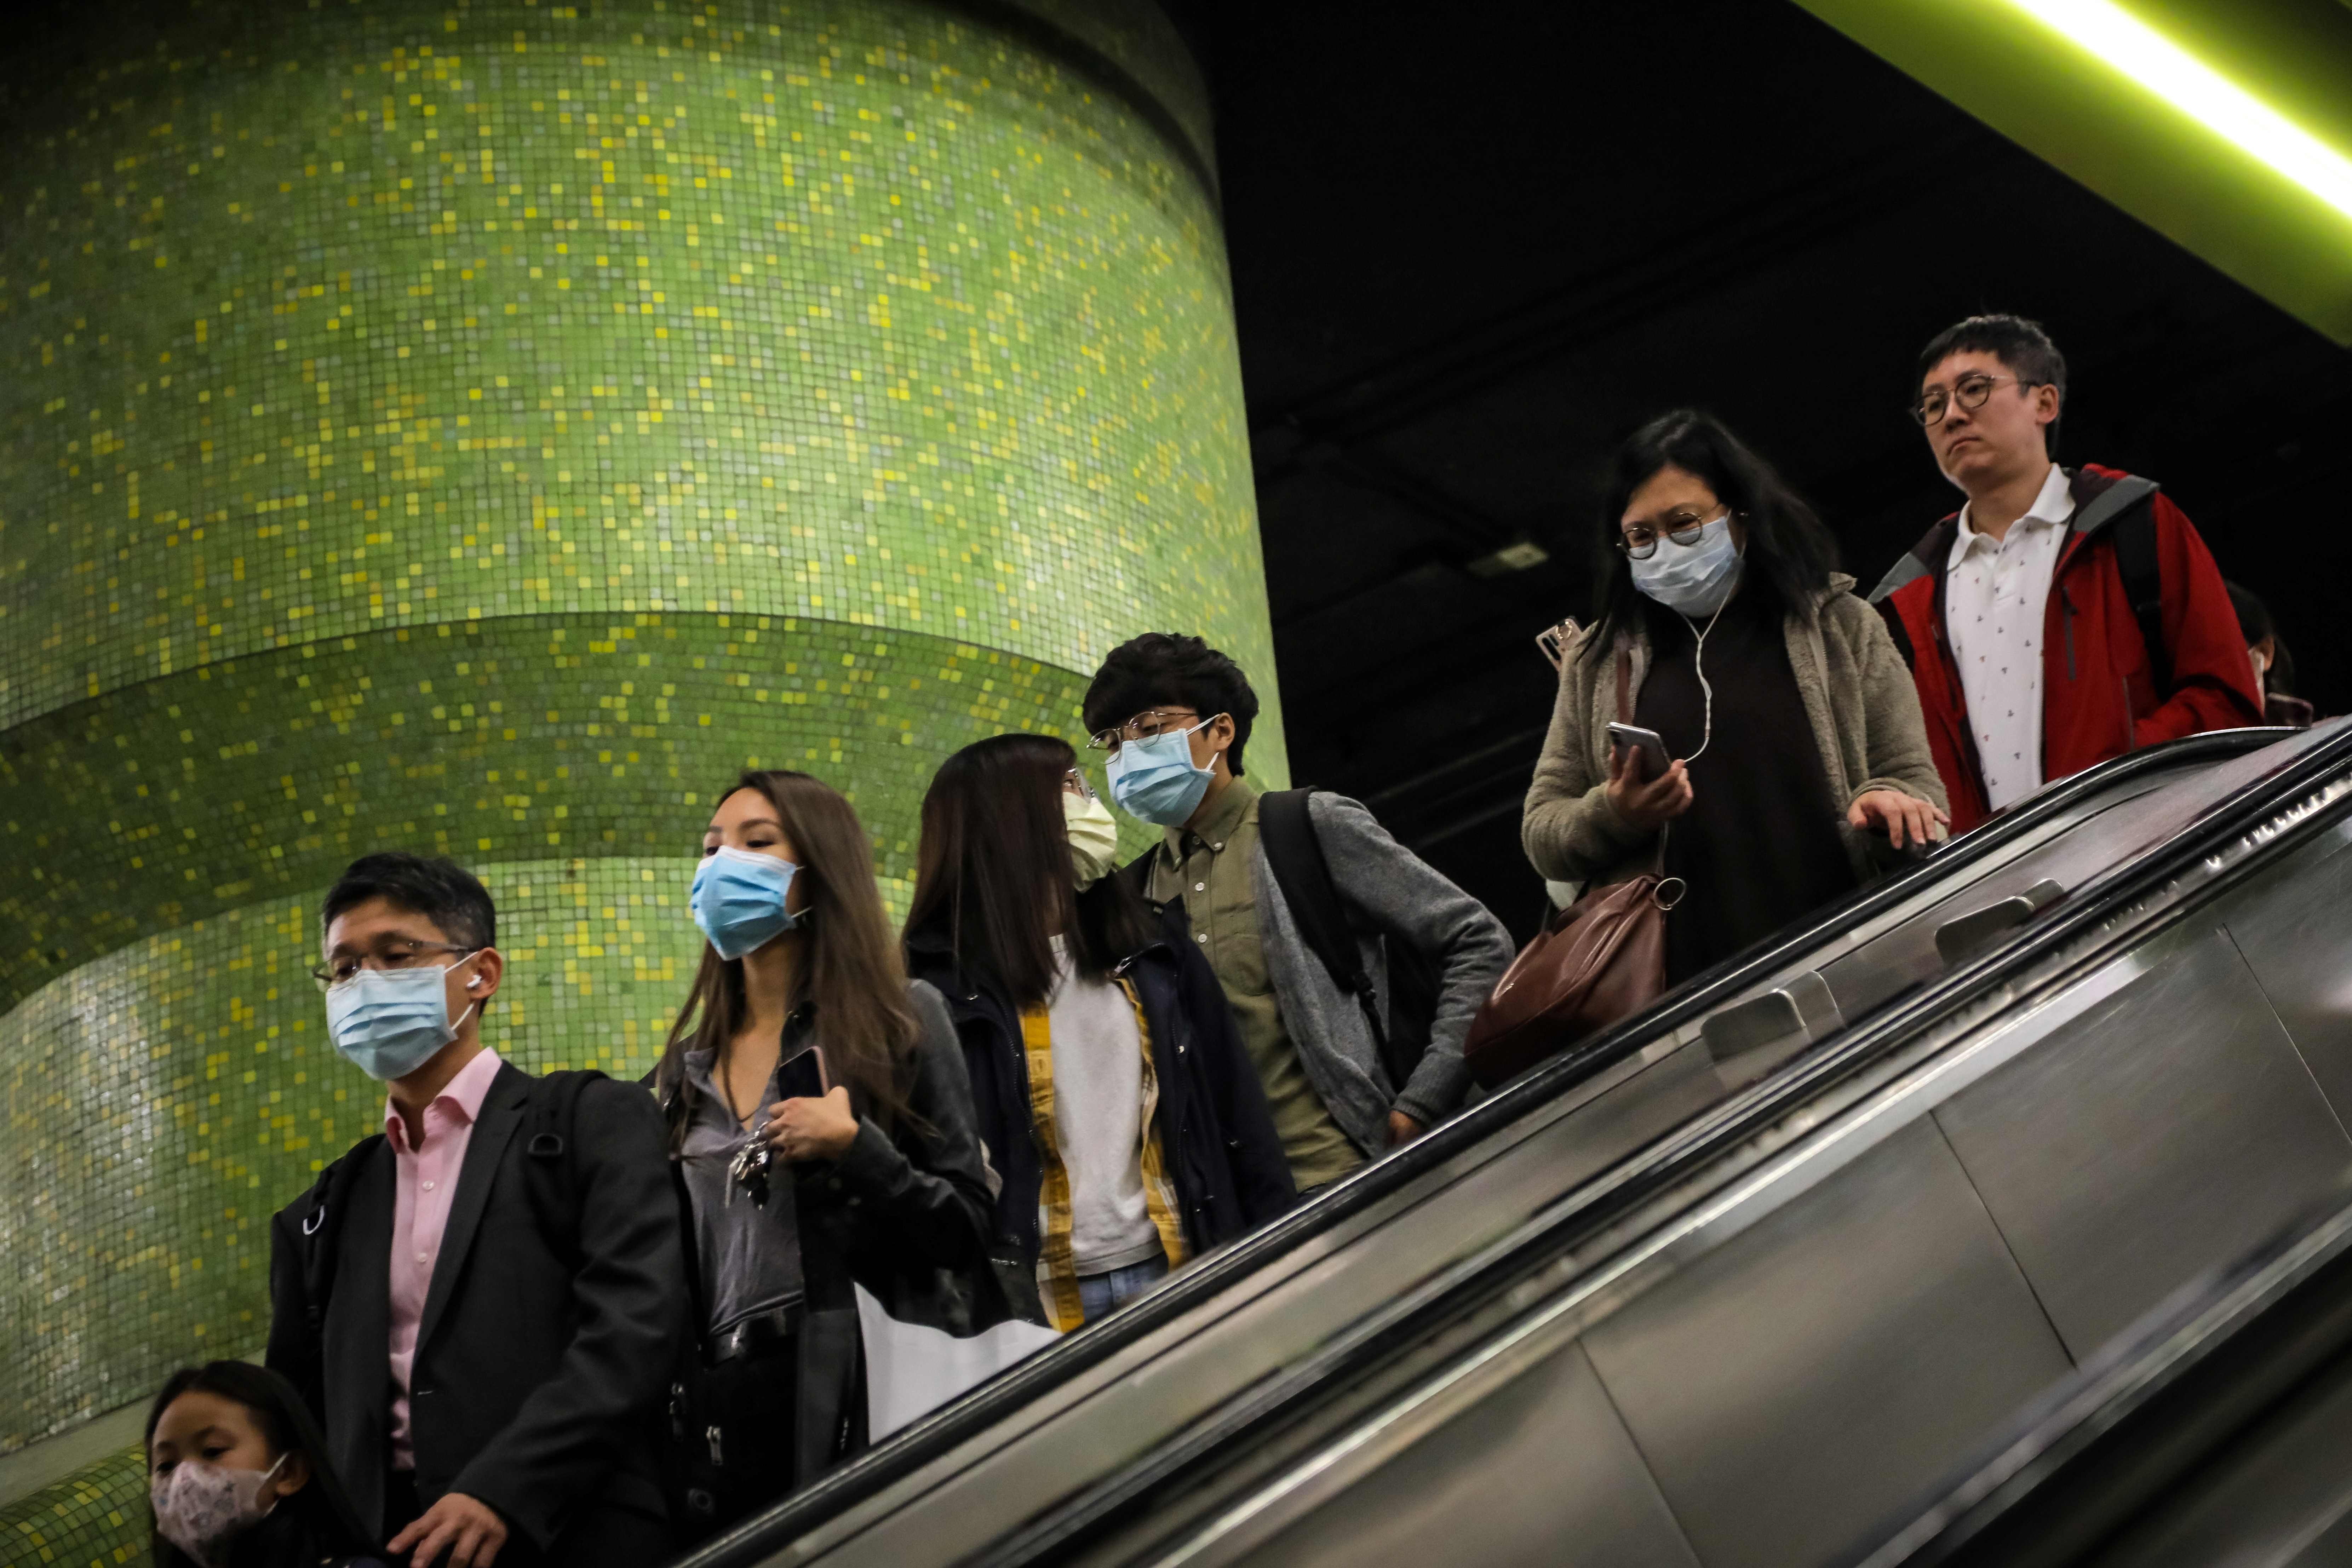 Commuters wear face masks as they ride an escalator at an MTR station on January 23. Photo: AFP